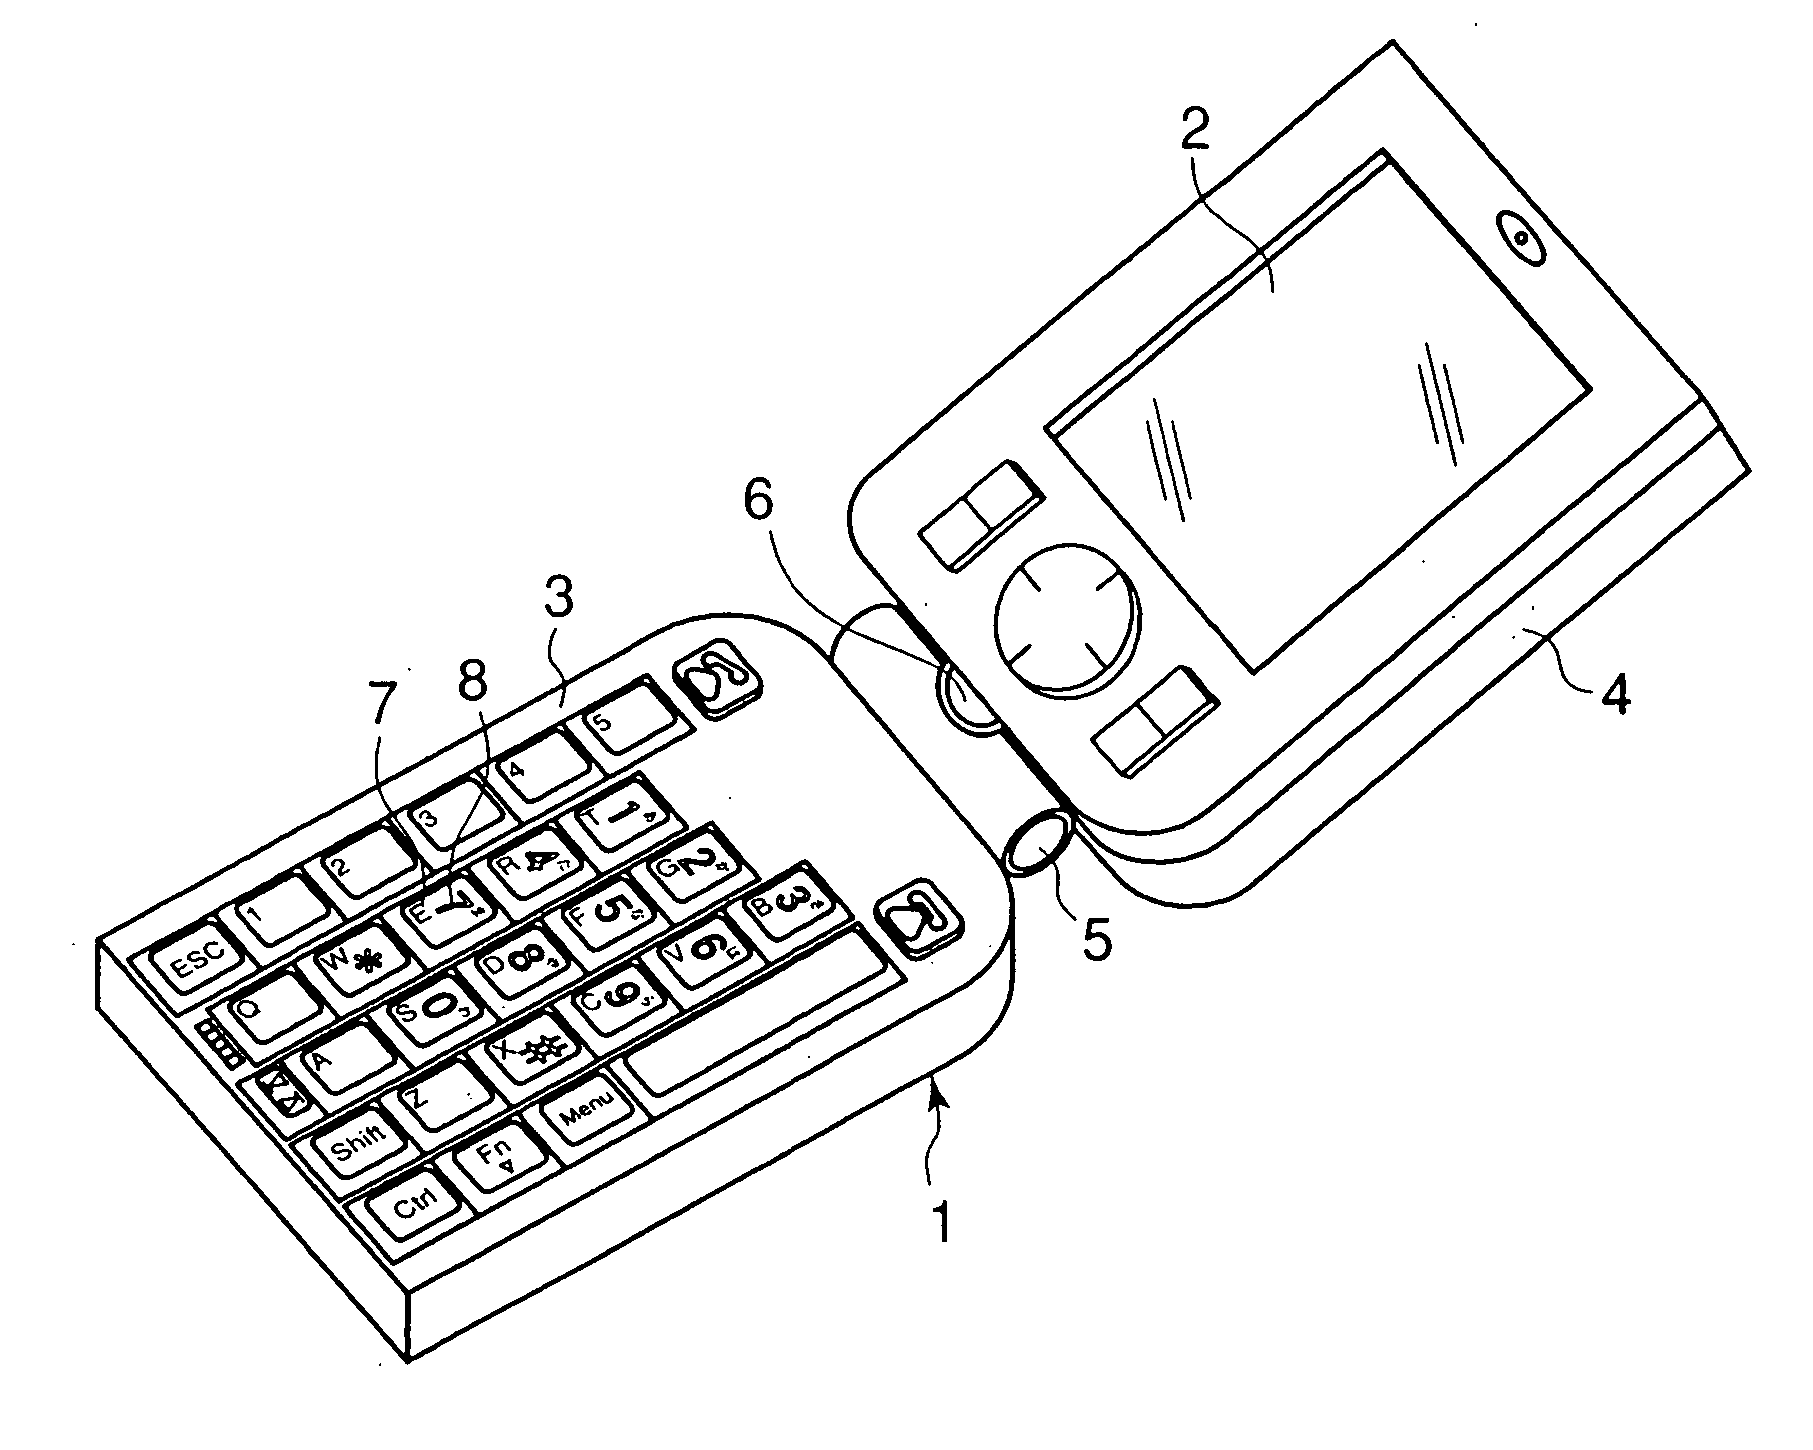 Multifunction personal computer/mobile phone